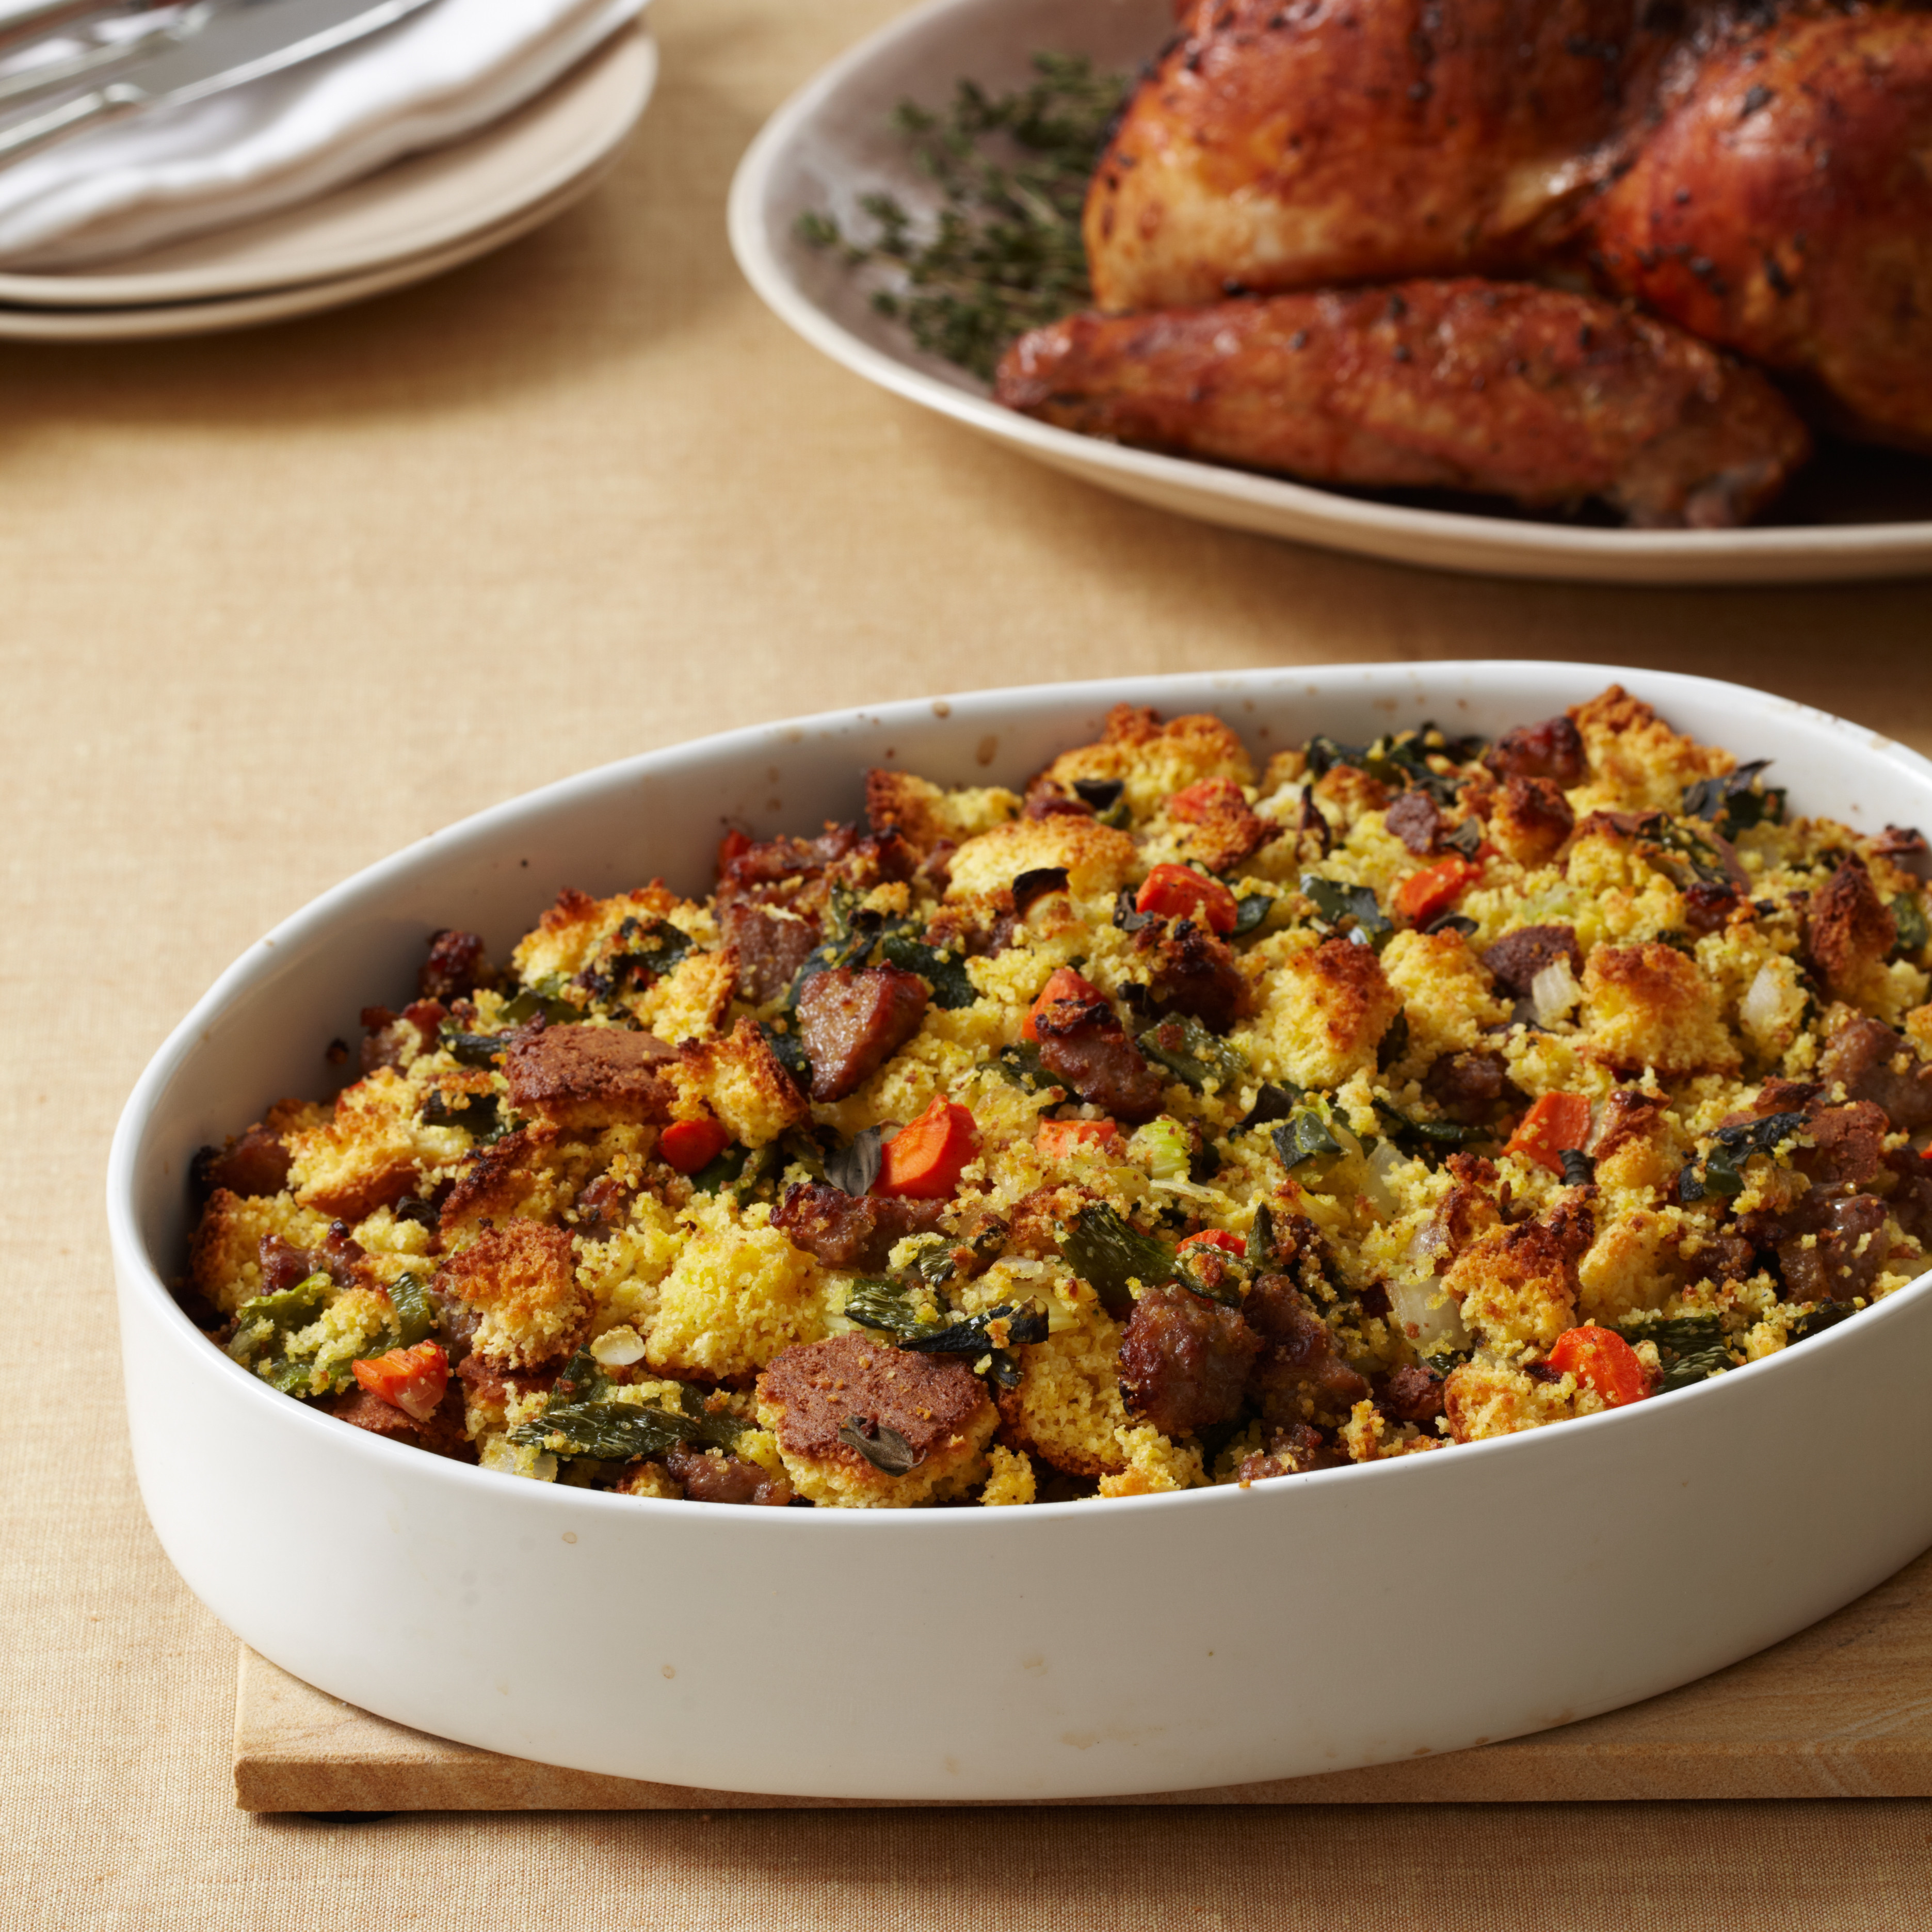 Bread Dressing For Thanksgiving
 Corn Bread Stuffing with Country Sausage Recipe Robert